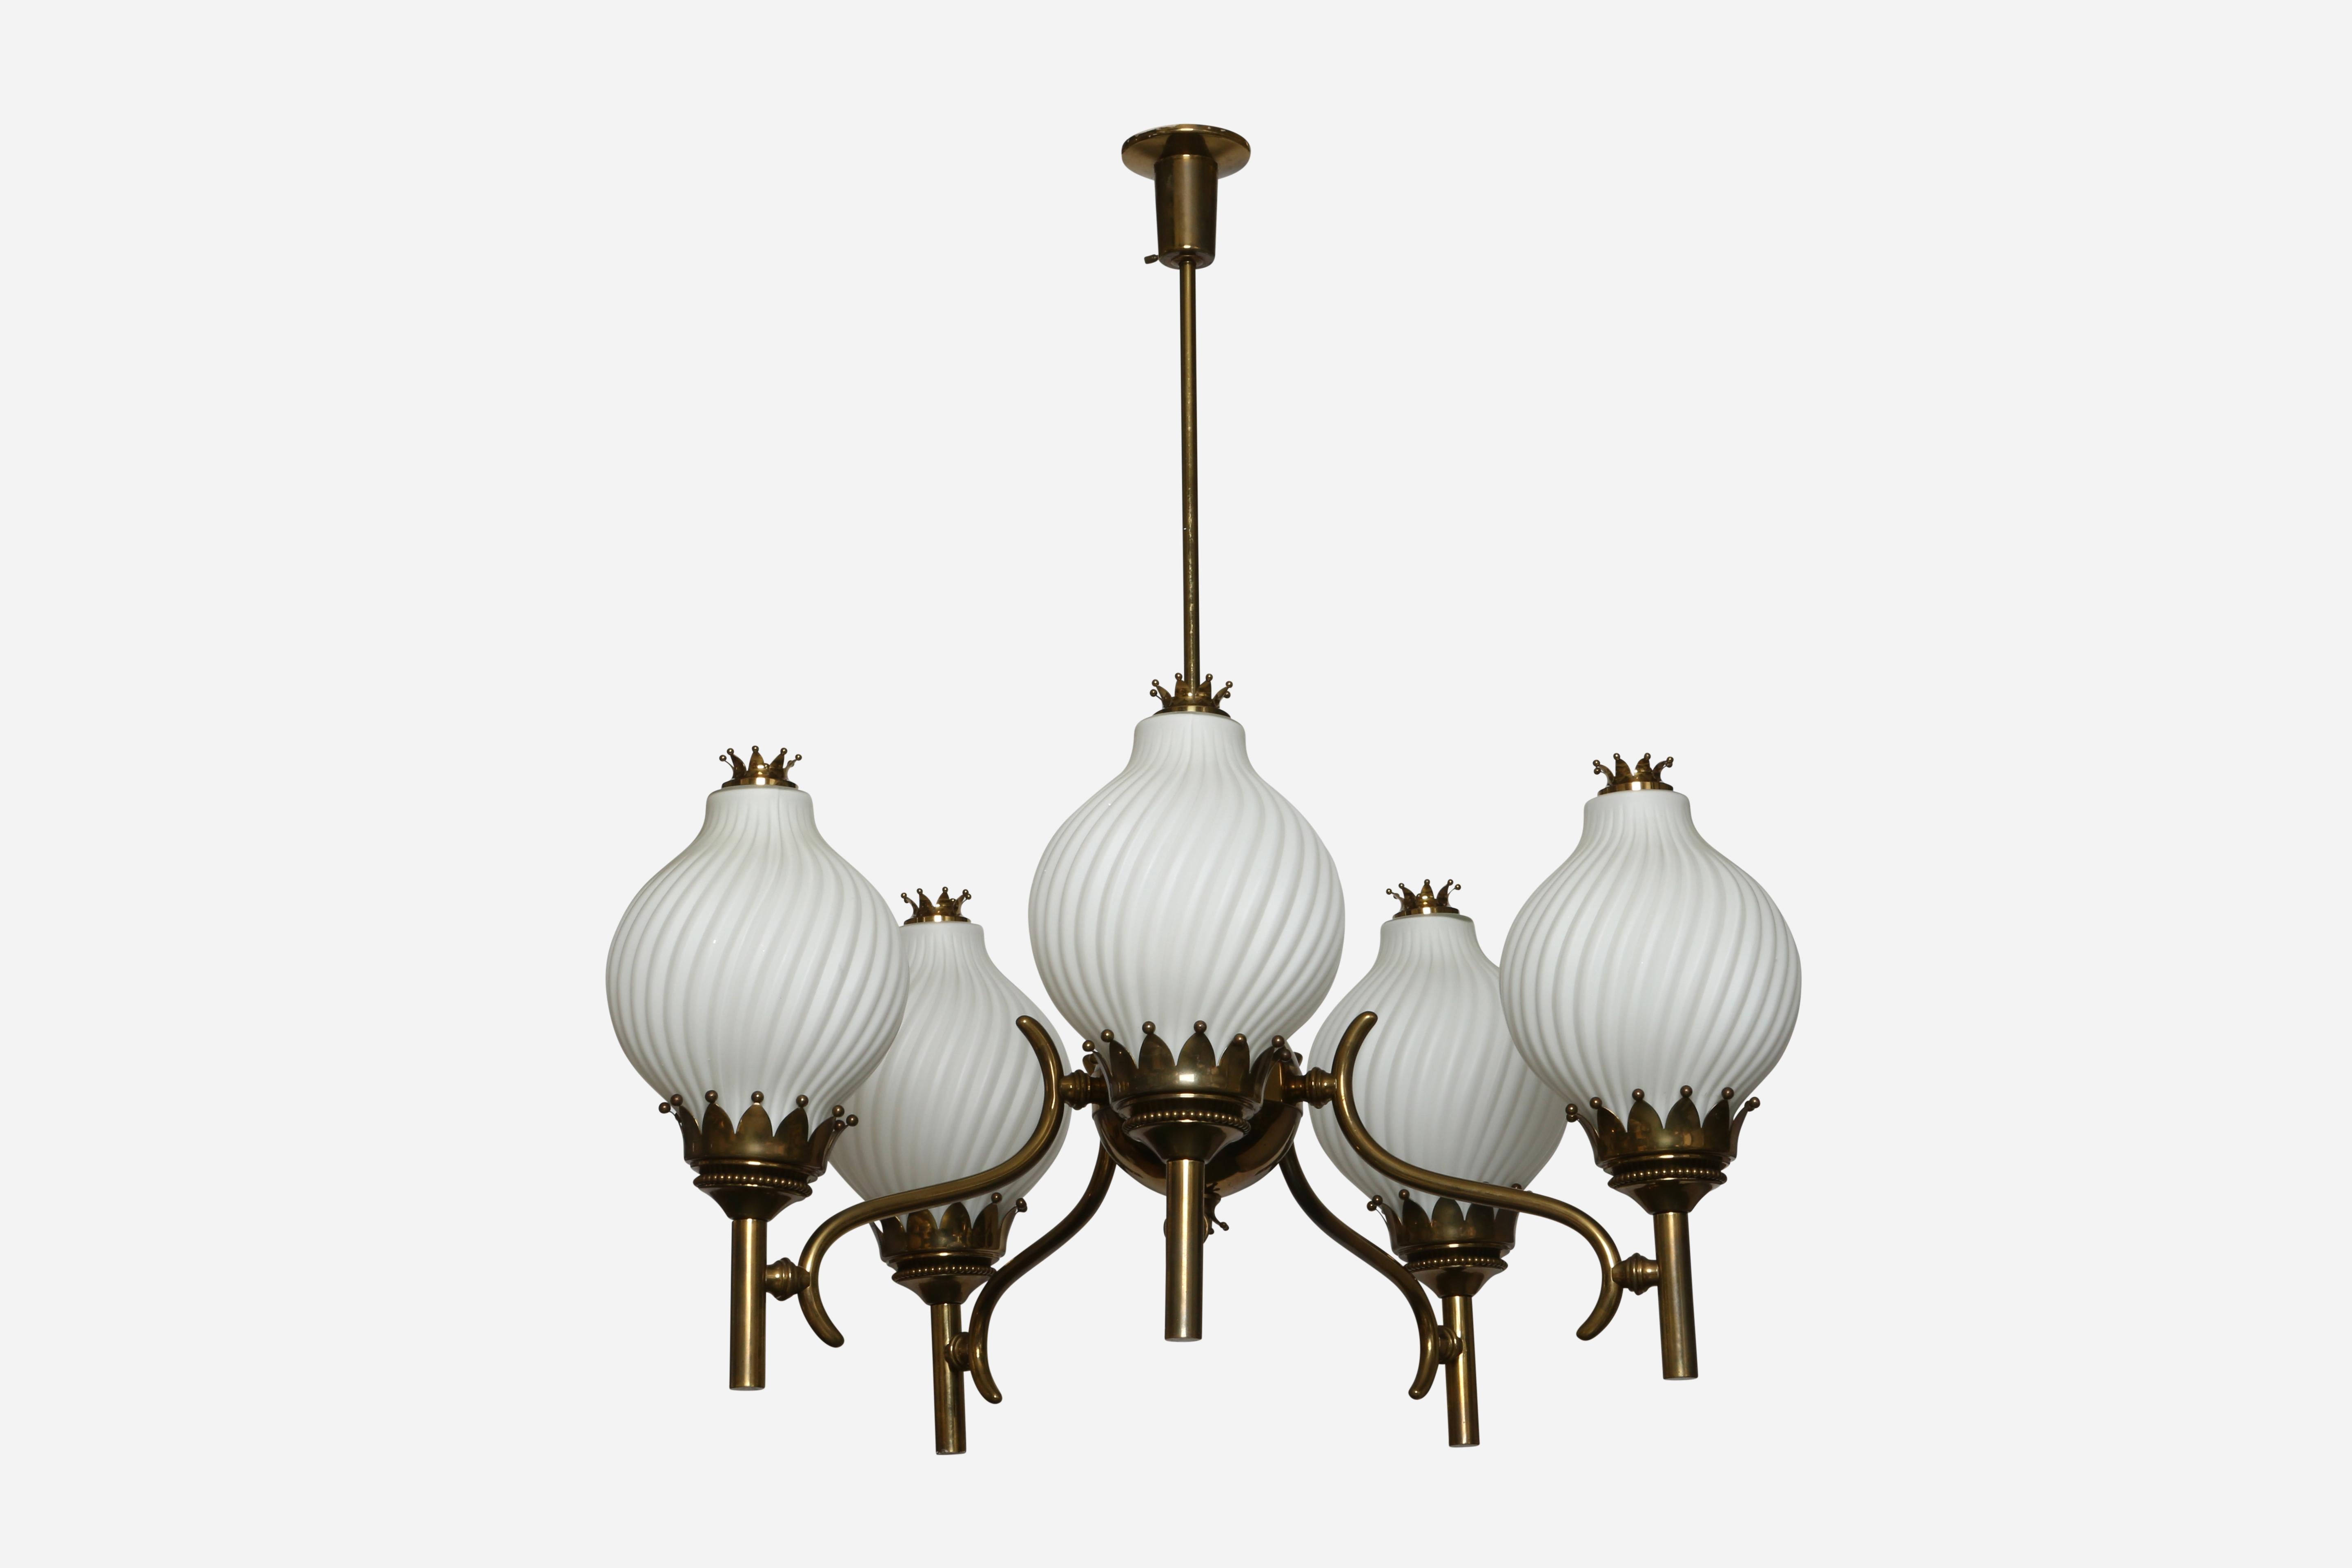 Angelo Lelii for Arredoluce chandelier.
Model Tortiglioni
Rare, large and very impressive.
5 big shades, 13 inches in height each.
Warm brass patina
Takes 5 medium base bulbs.
Complimentary US rewiring upon request.
Overall drop